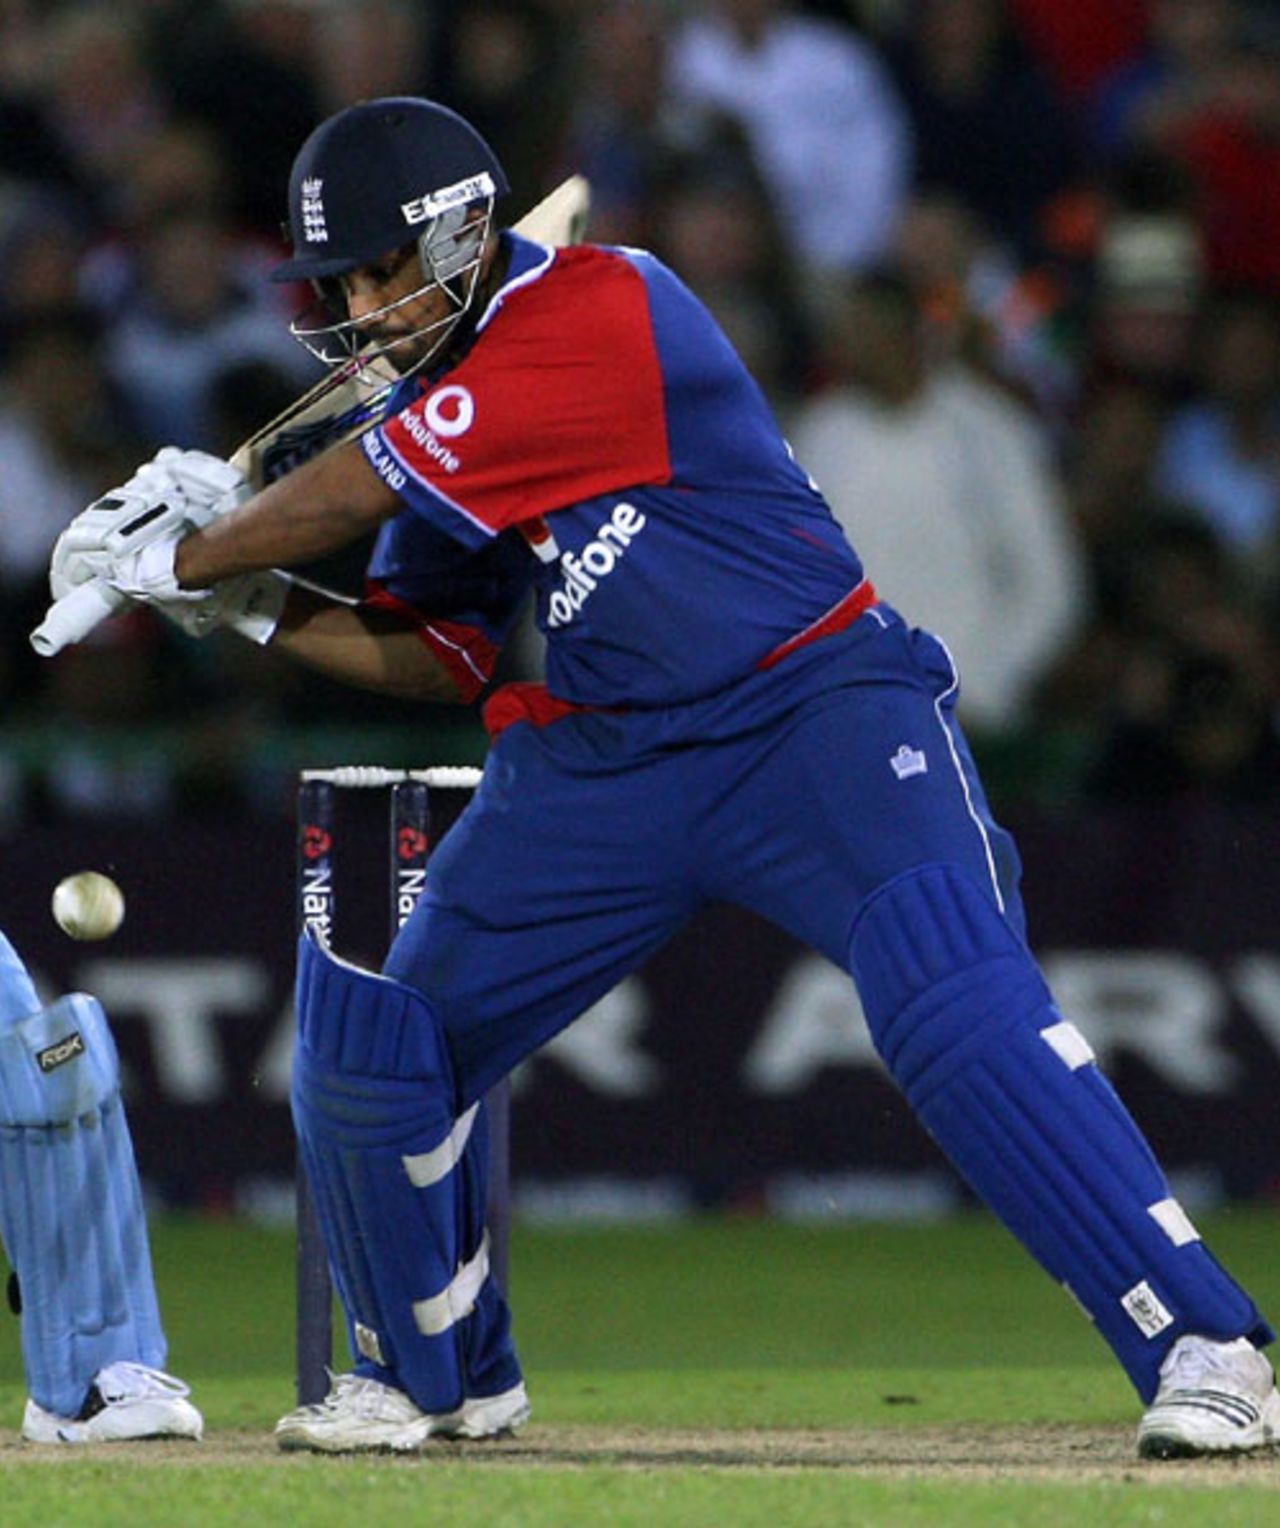 Ravi Bopara cuts the ball during his unbeaten 43,  England v India, 4th ODI, Old Trafford, August 30, 2007
